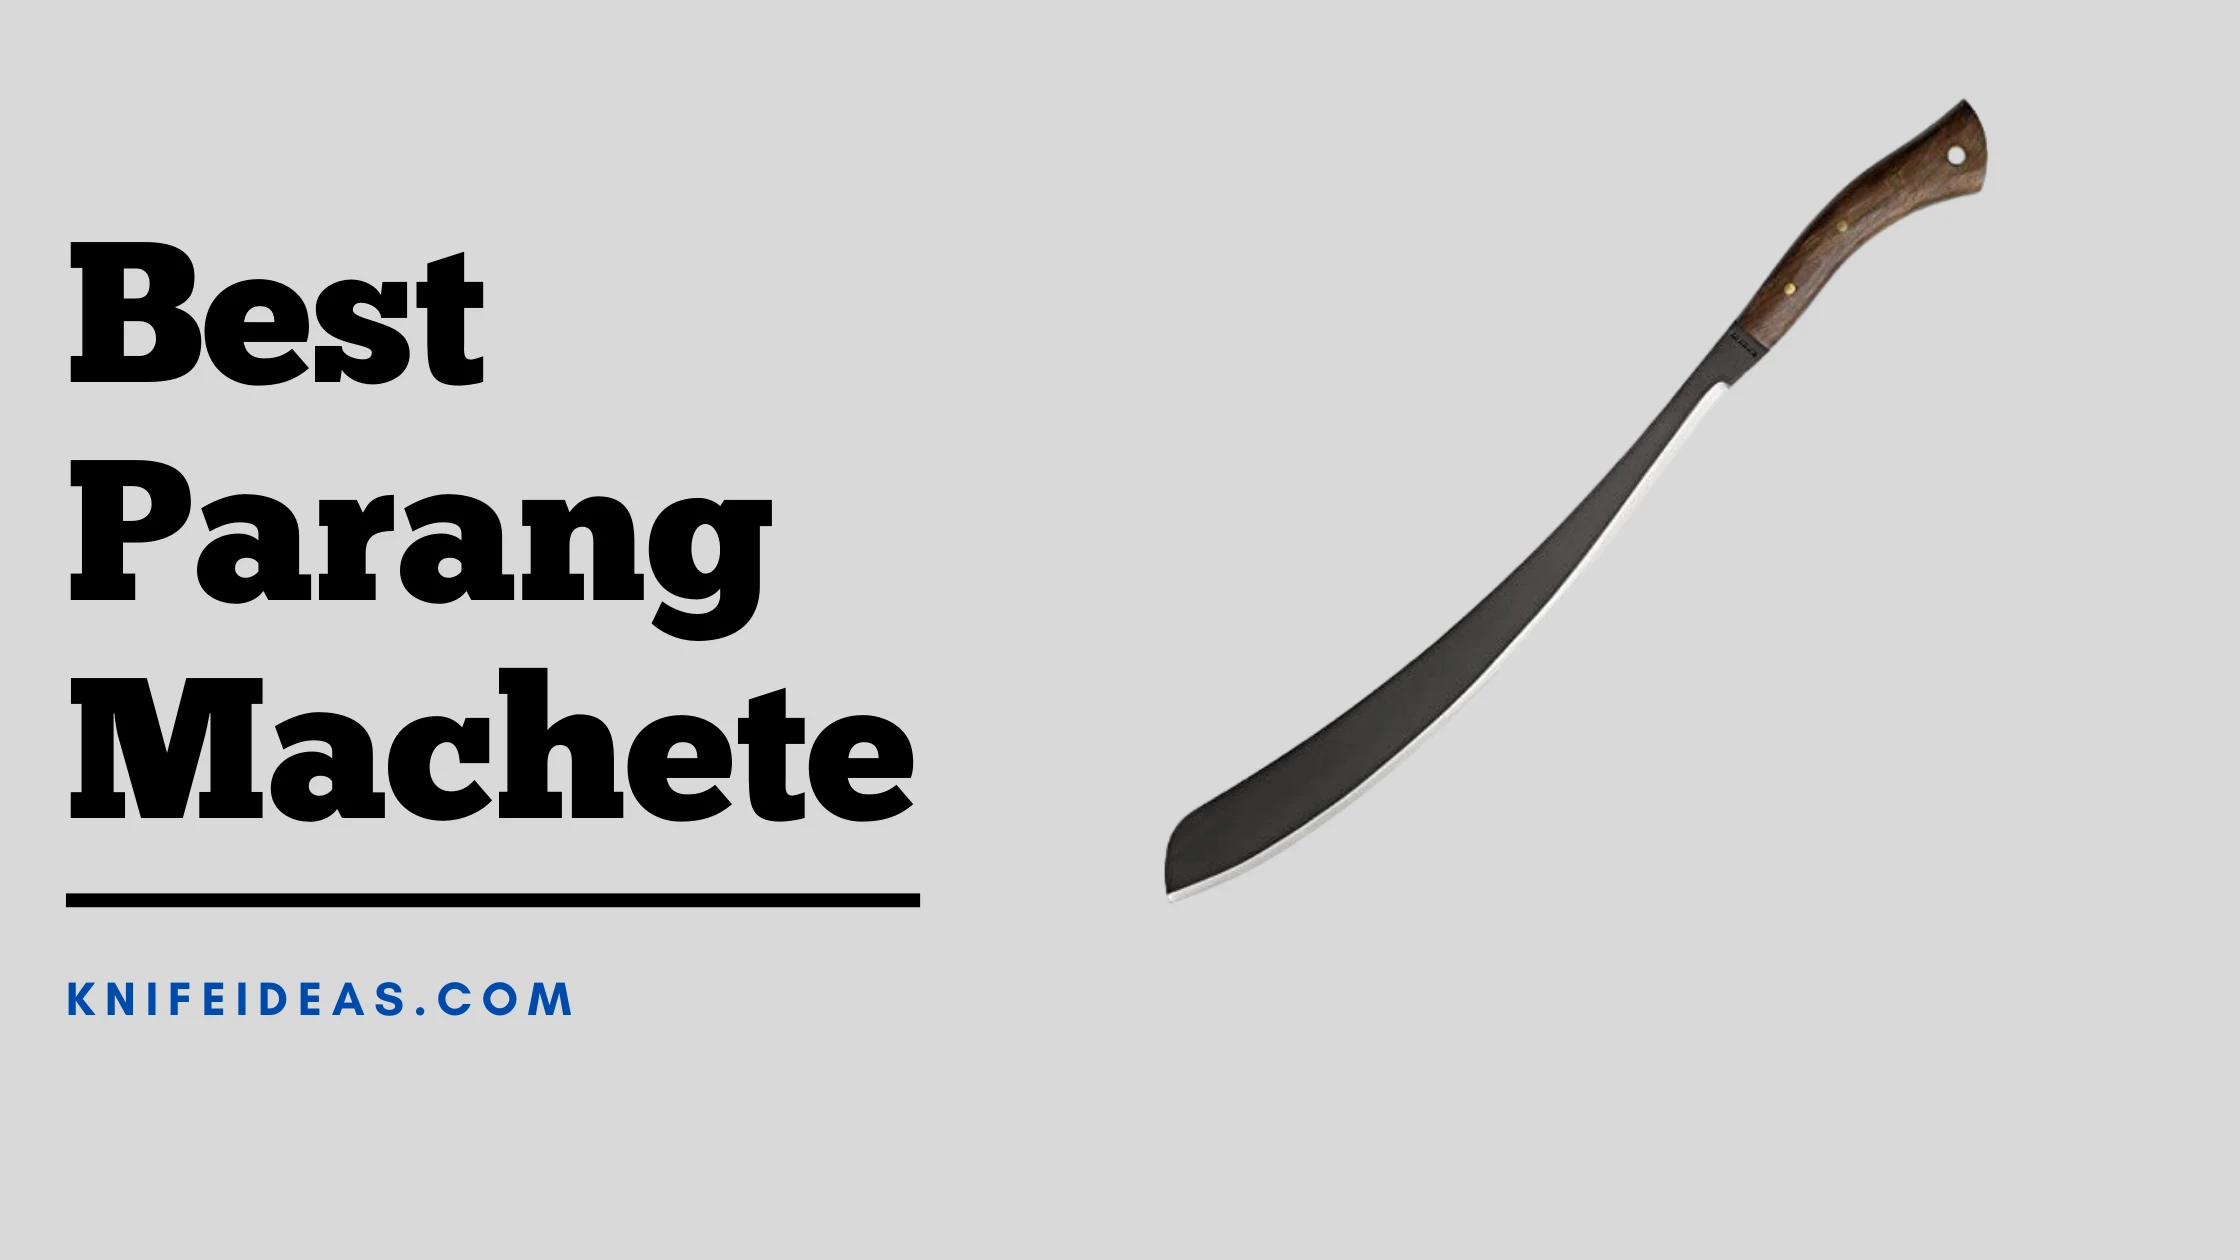 Conclusion on Which is the Best Parang Machete?